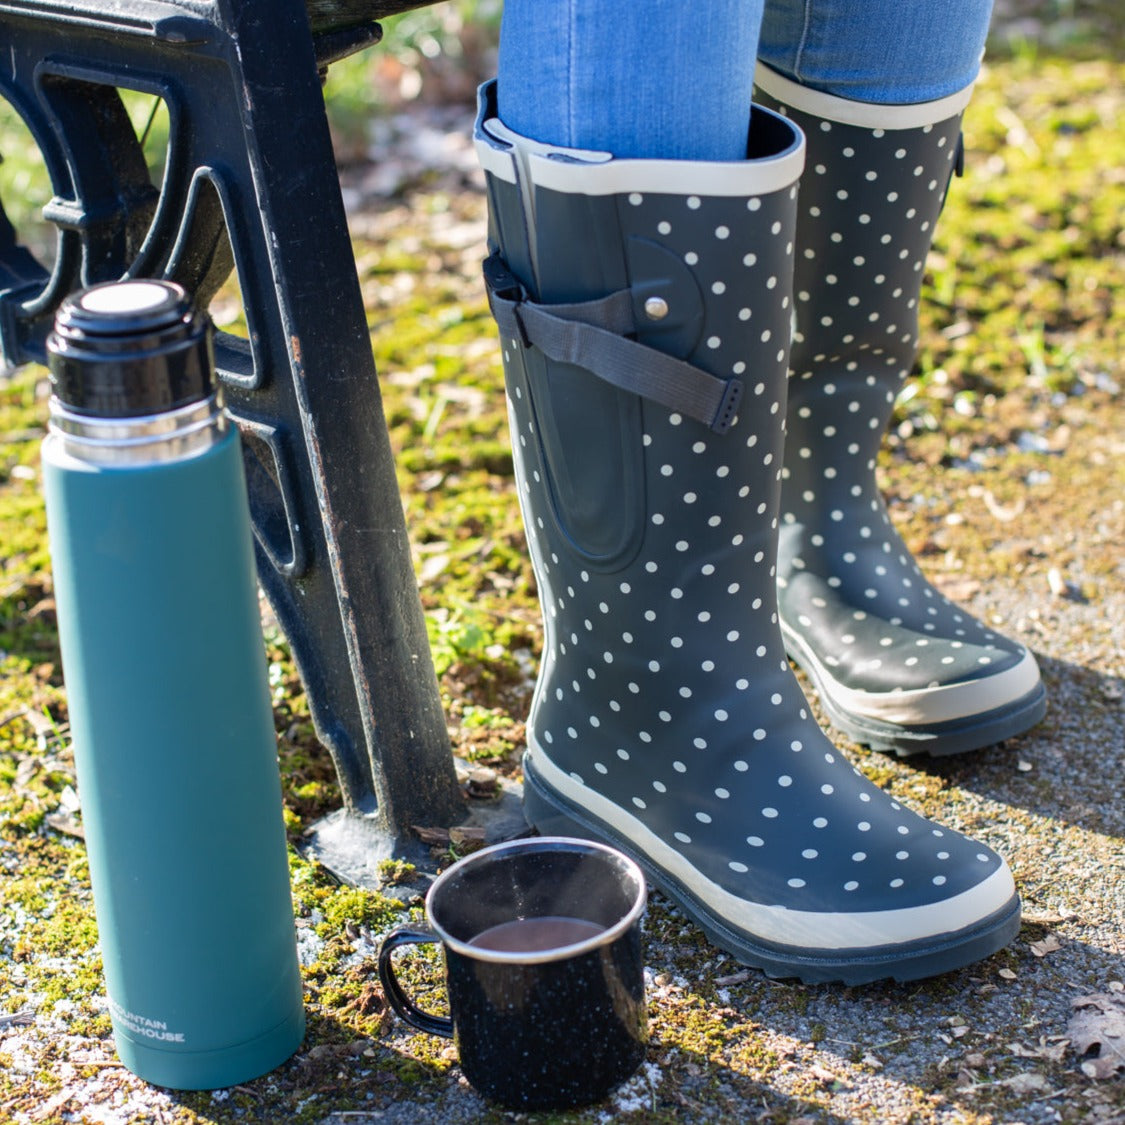 Spotty Grey Ladies Wide Calf Wellies – up to 50cm calf